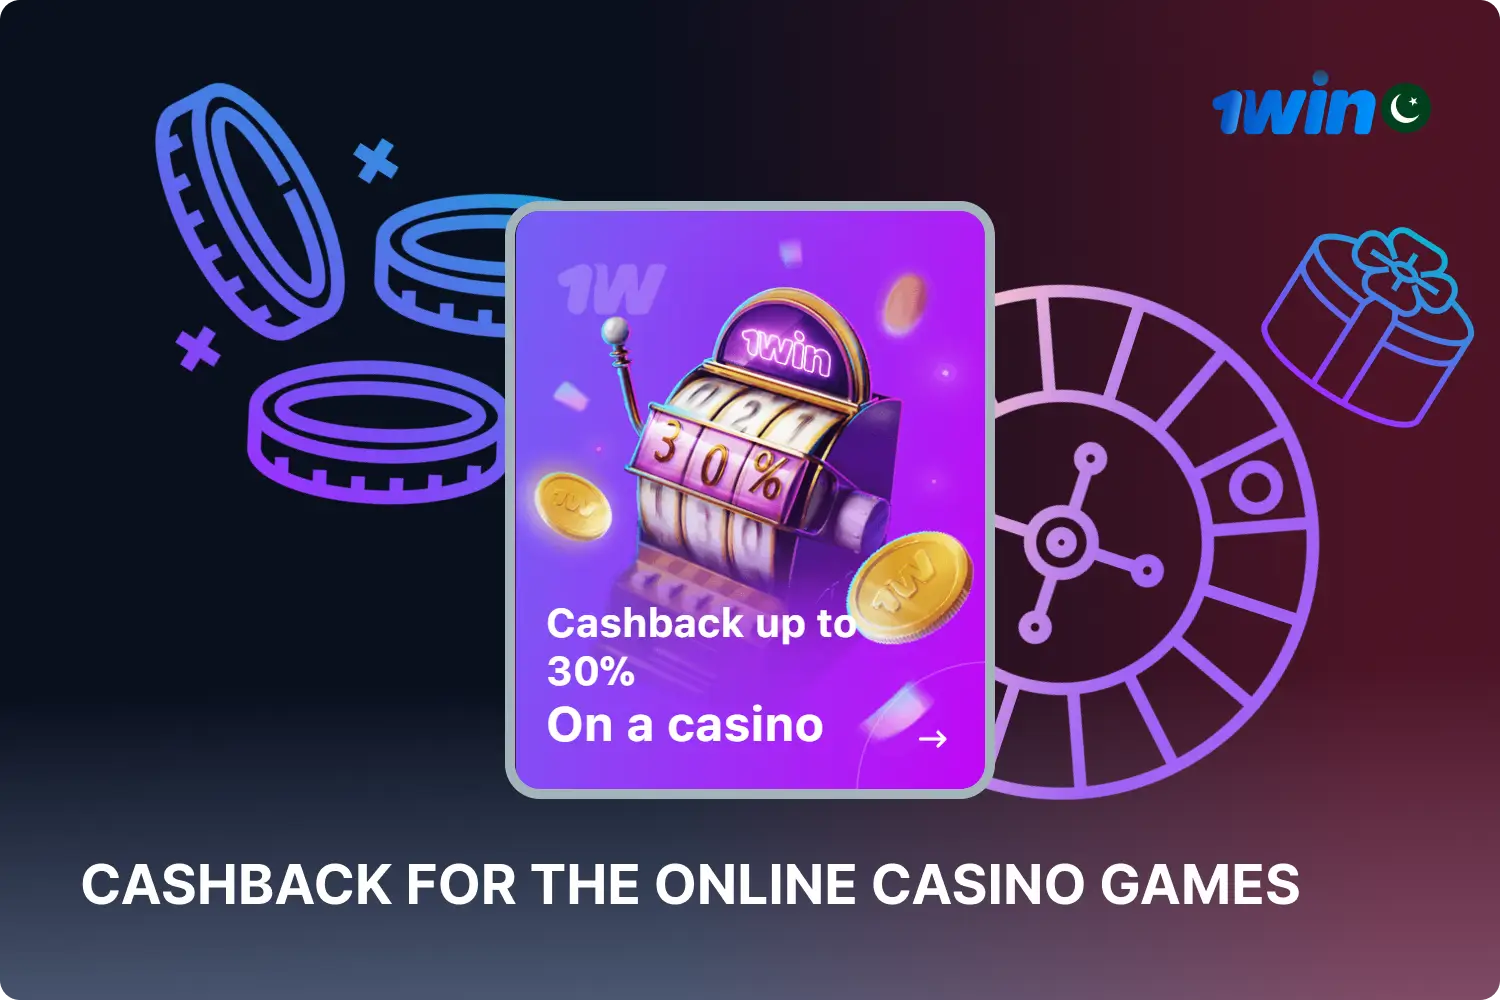 1win offers Pakistani players a weekly cashback bonus for online casino games